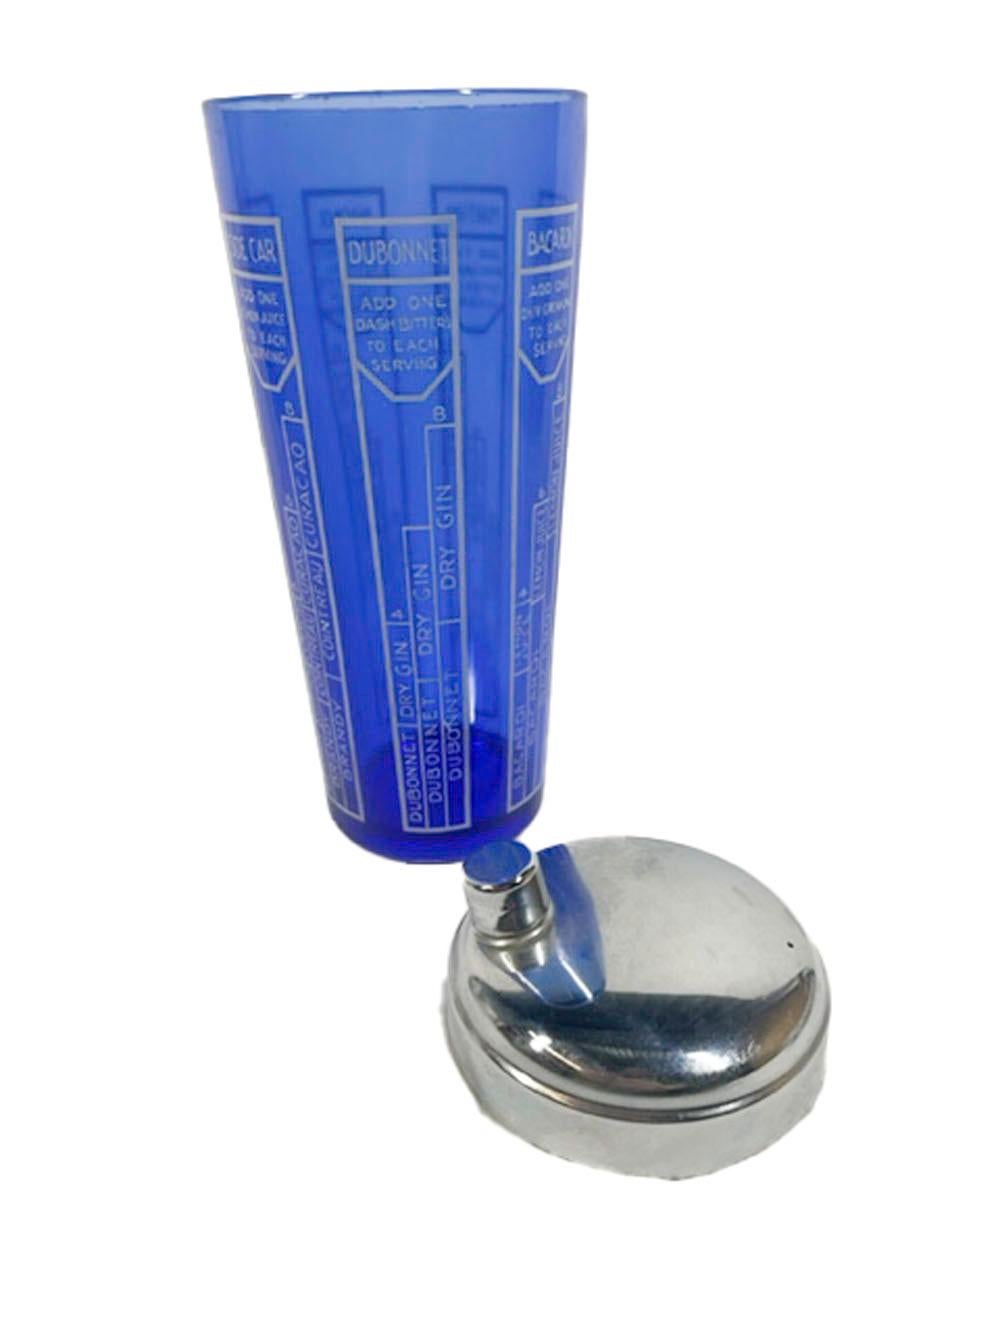 20th Century Art Deco Cobalt Glass Cocktail Shaker with Recipes in White Enamel